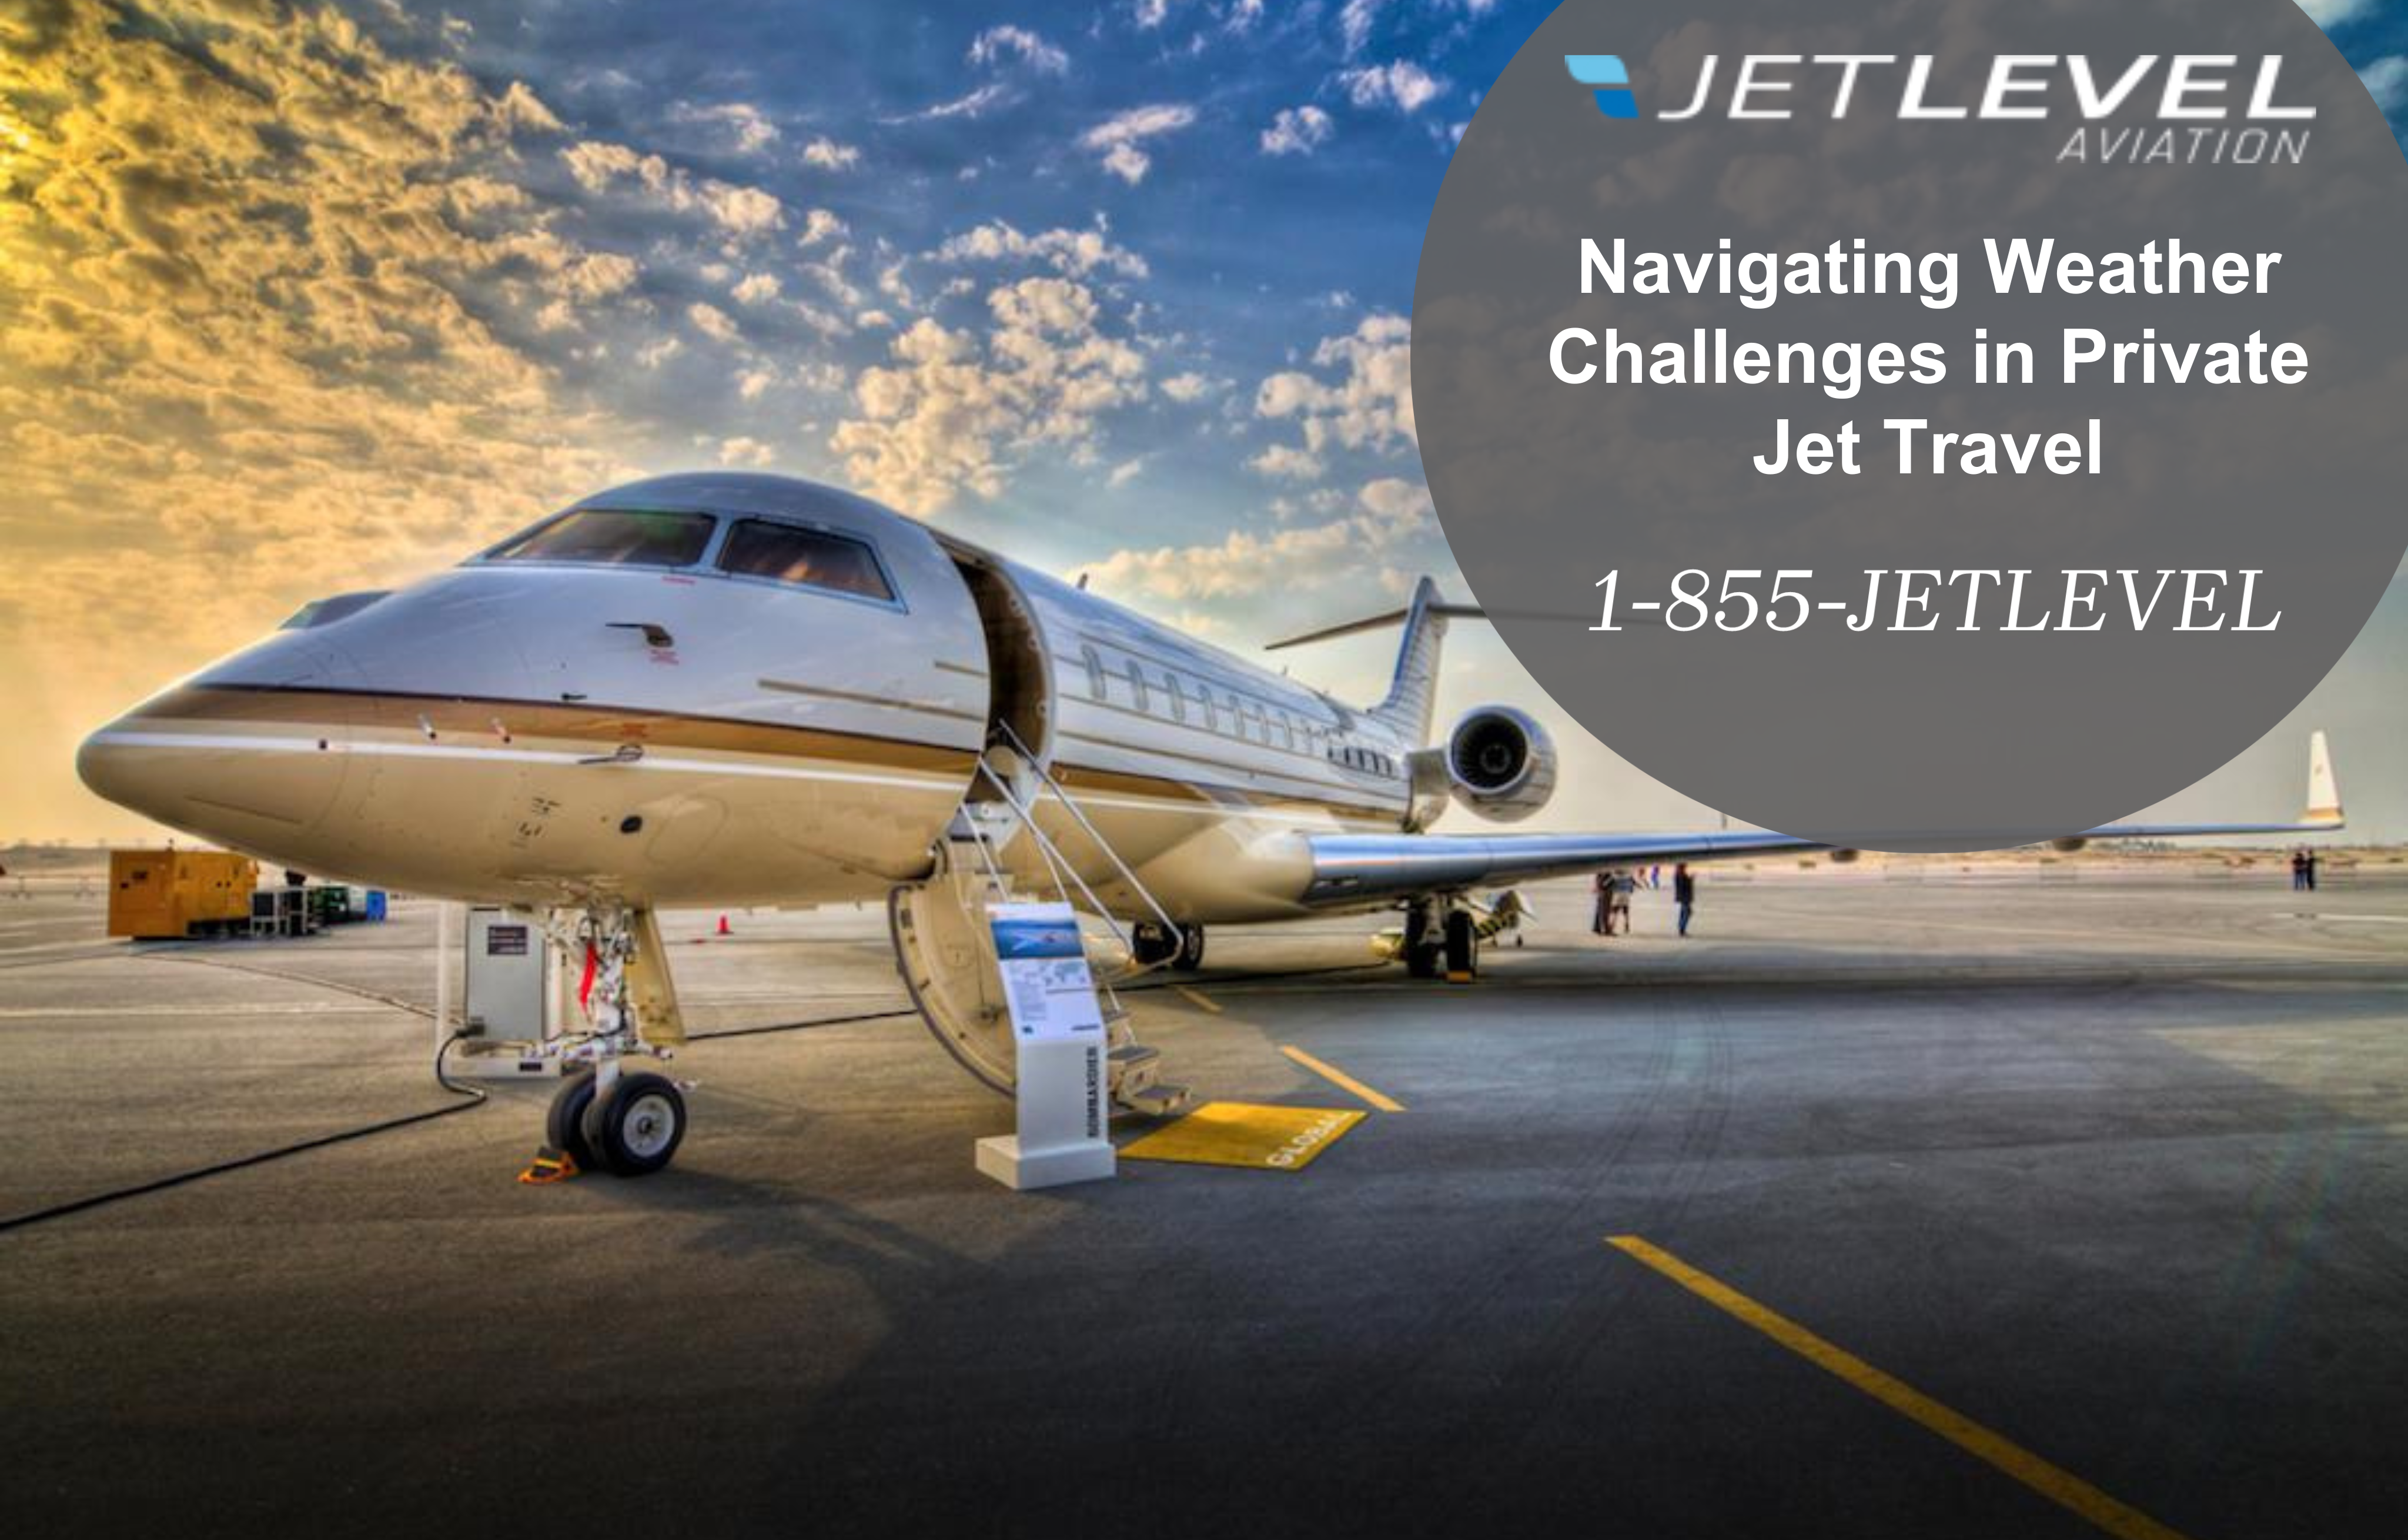 Navigating Weather Challenges in Private Jet Travel